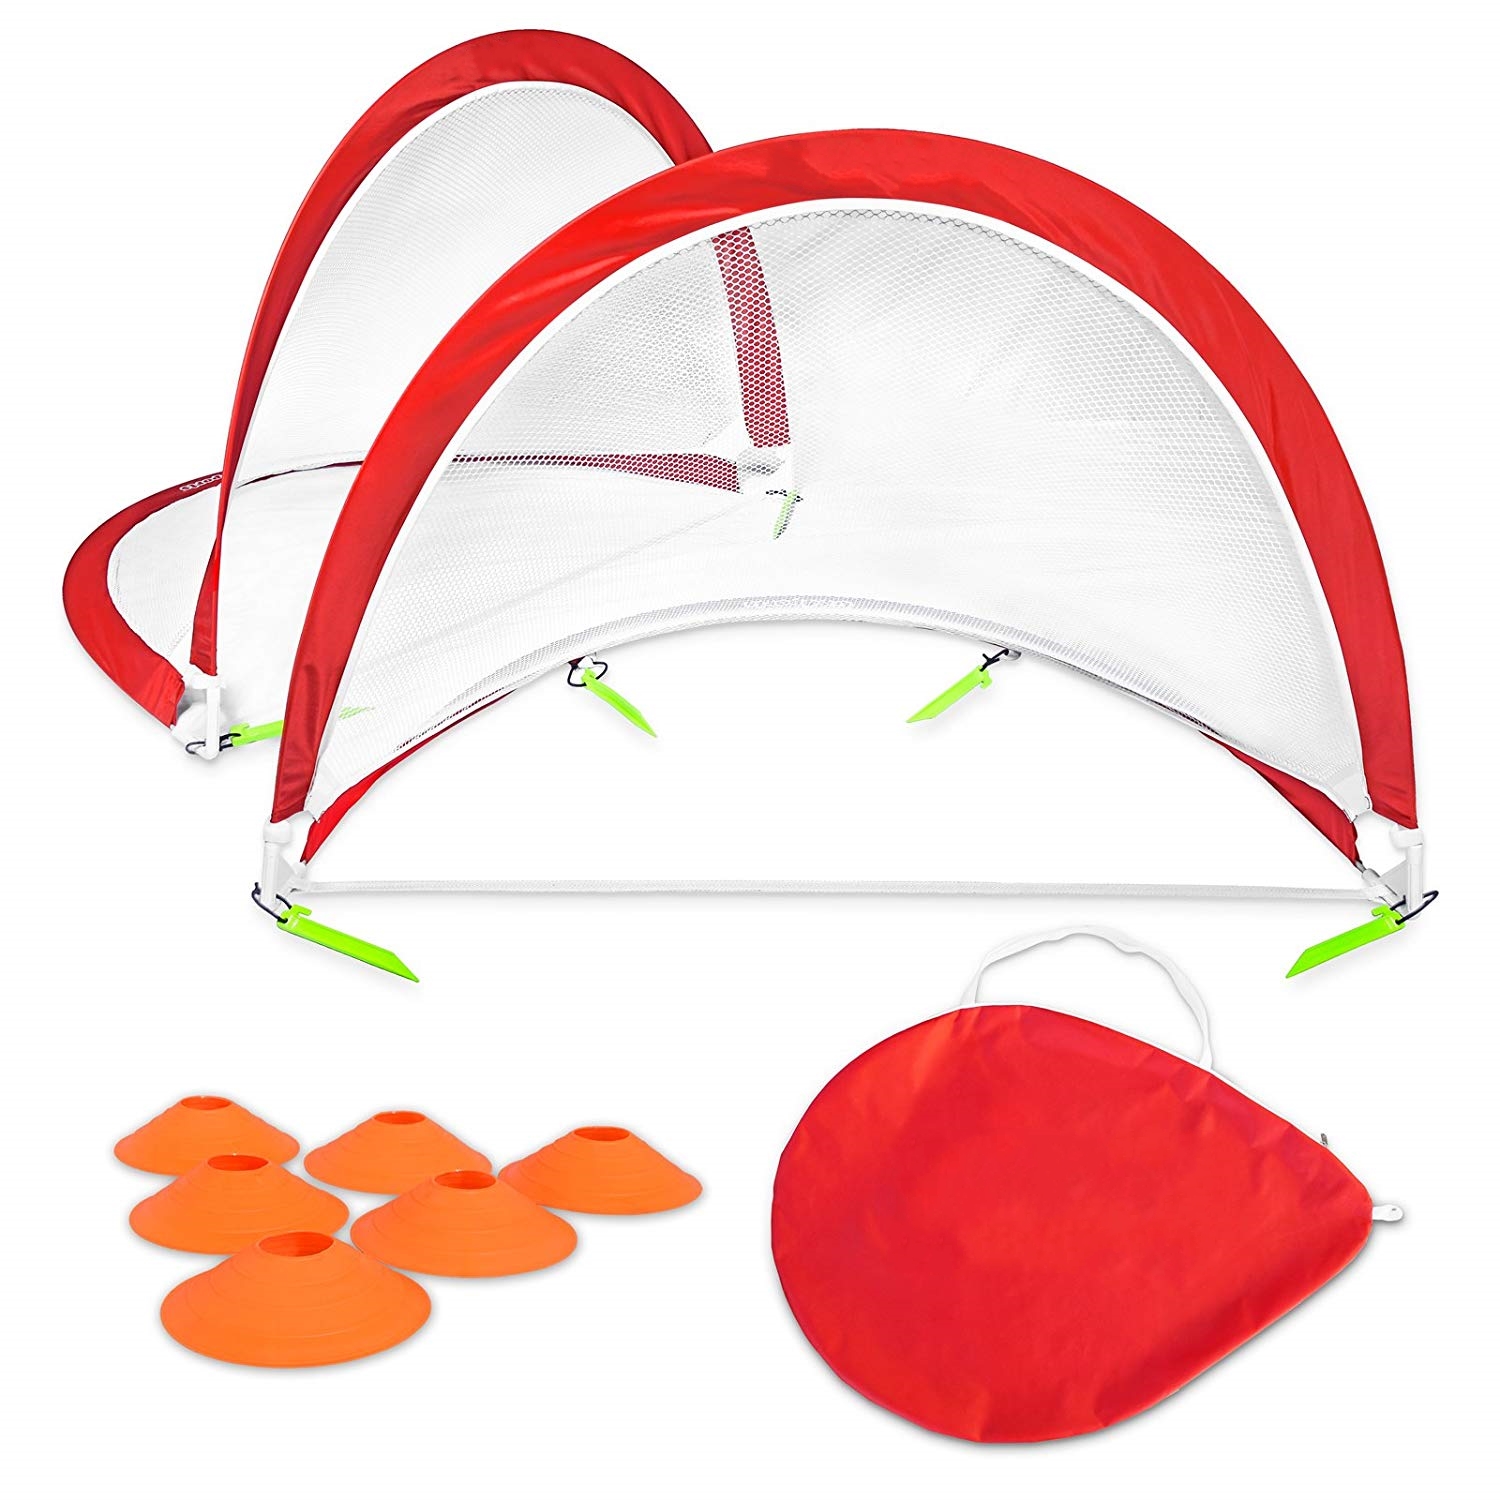 AIOIAI Foldable Pop Up Soccer Goals, Set of 2, With Agility Training Cones and Portable Carrying Case